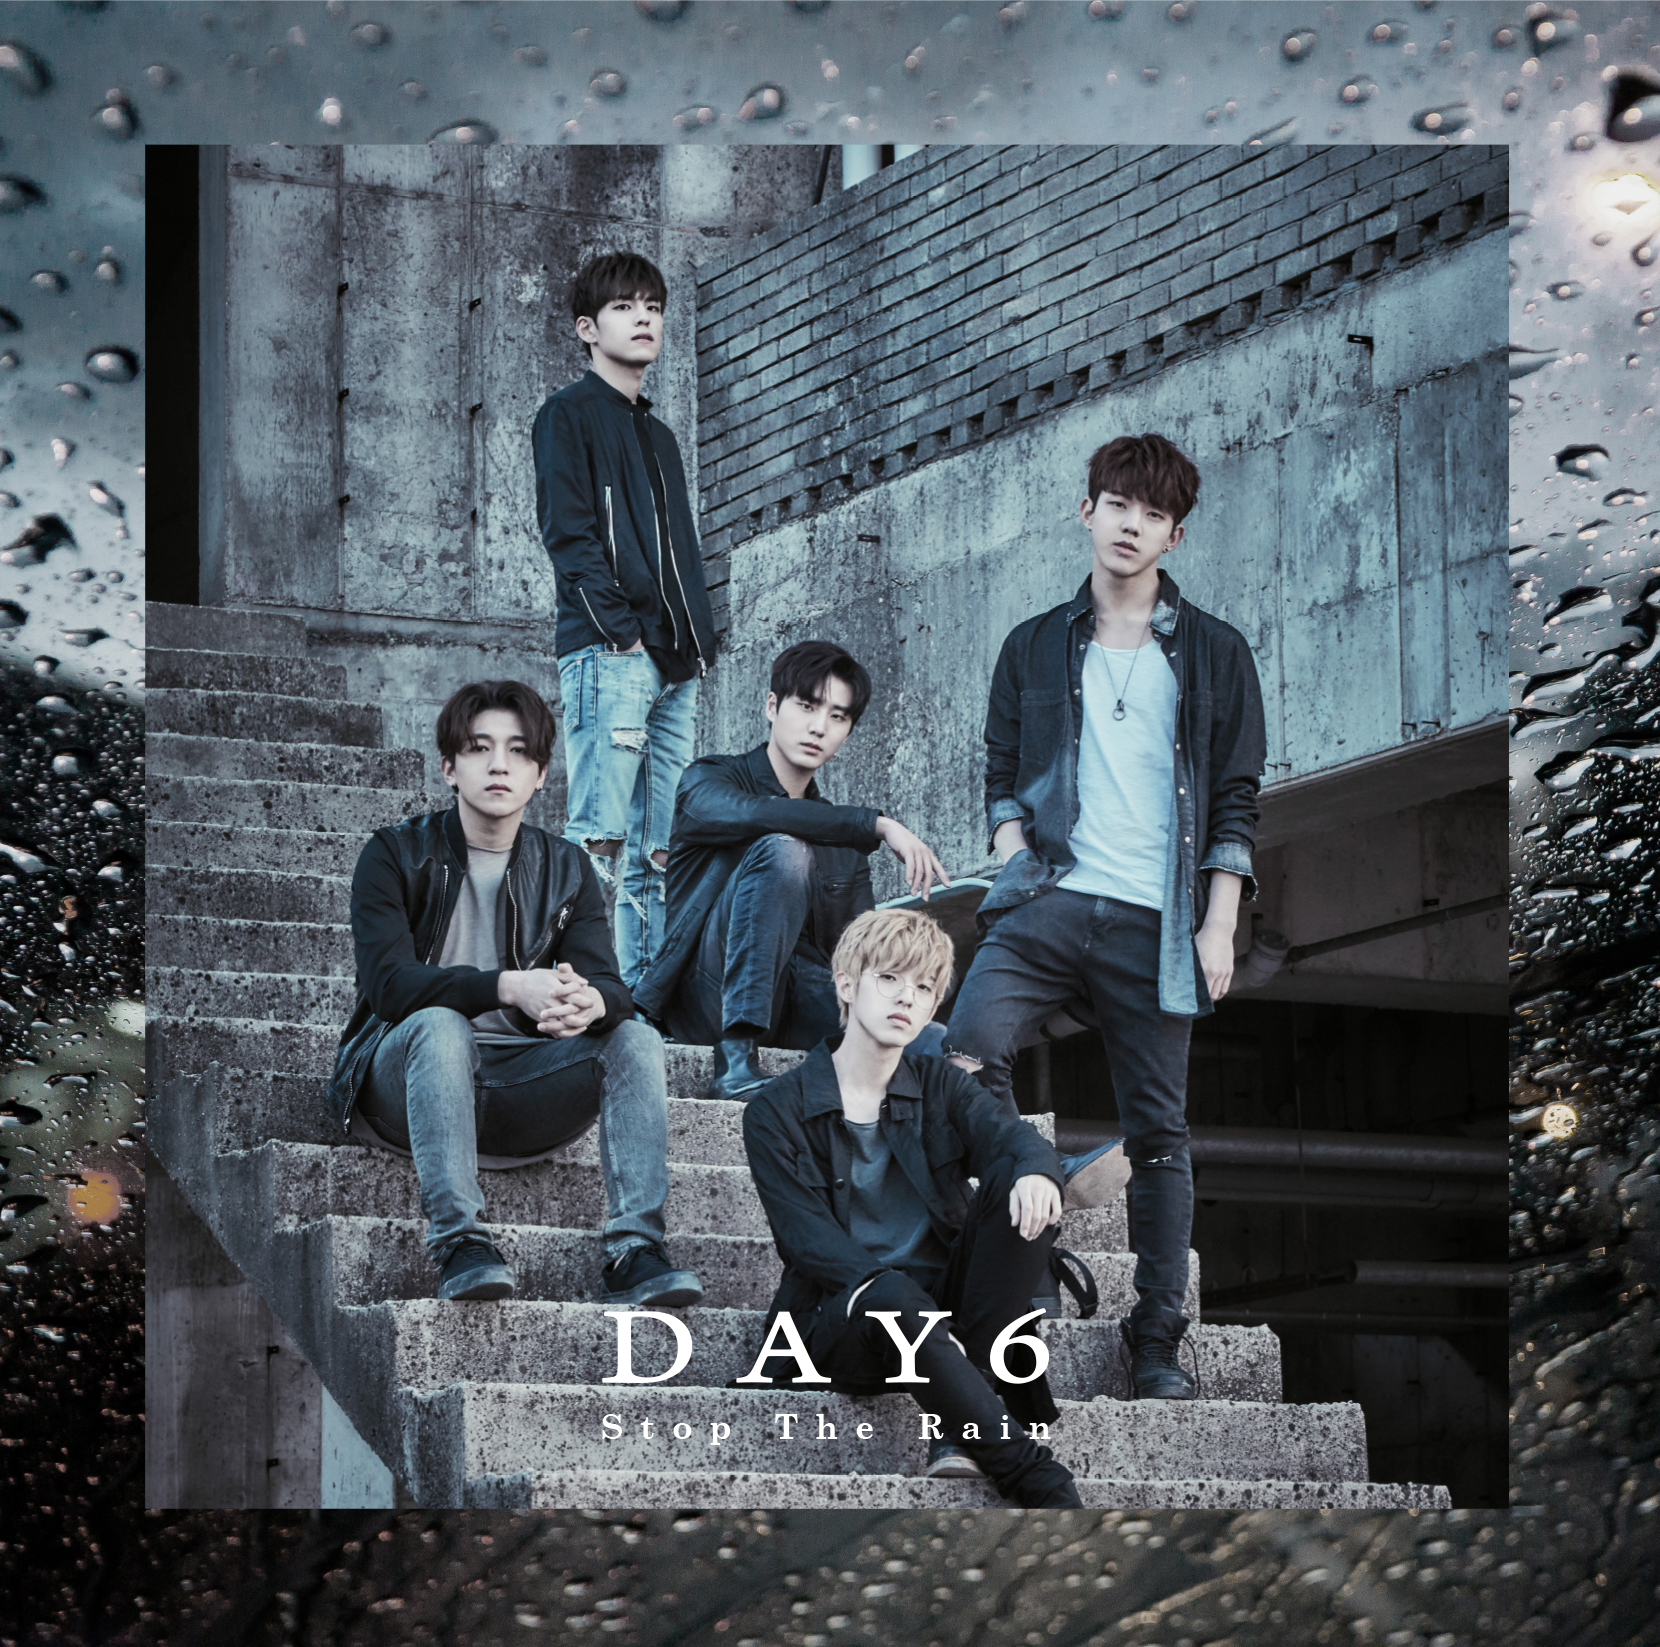 Day6 welcome to the. Группа day6. Группа day6 участники. K Pop группа day6. Дэй 6 участники.